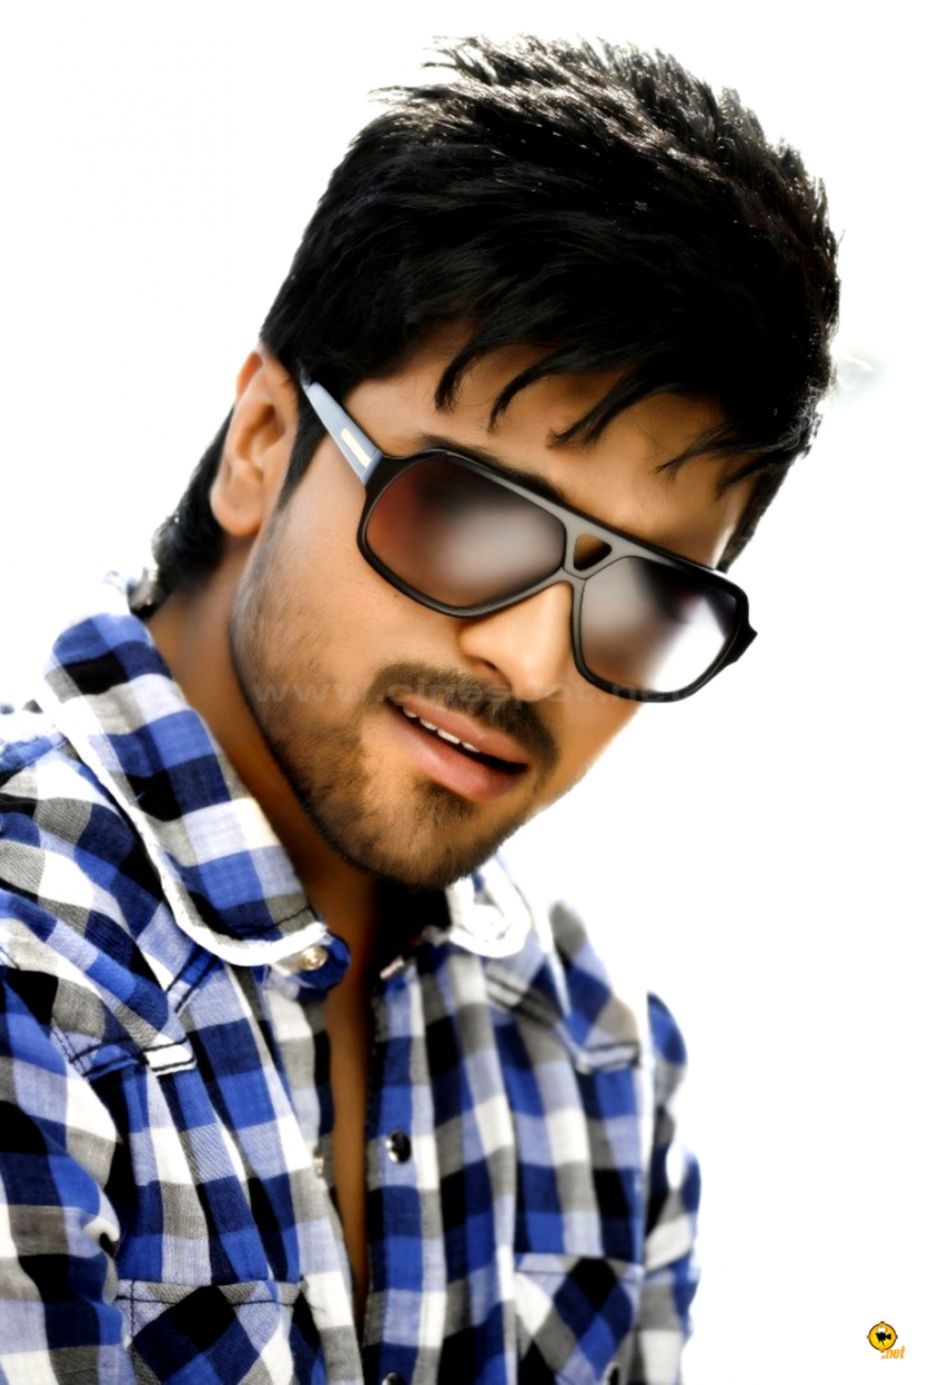 Download Ram Charan Teja Photo 89 Of 120 Pics Wallpaper Photo Movie Ram Charan Hairstyle for desktop or m. Actor photo, Photo and video editor, HD photo